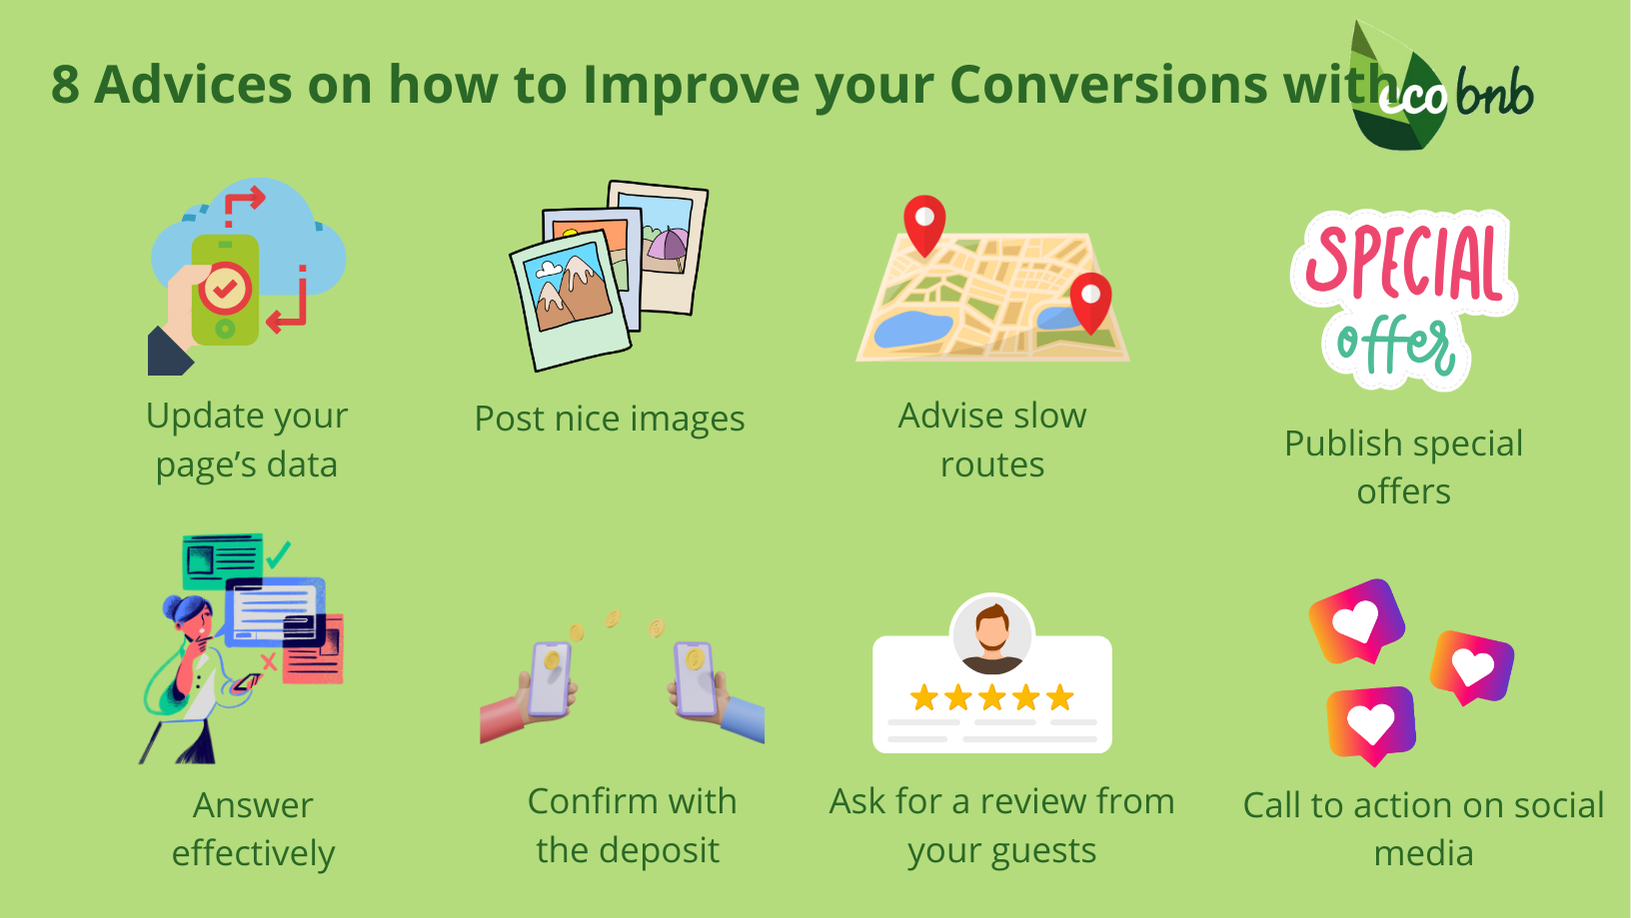 Improve conversions with Ecobnb